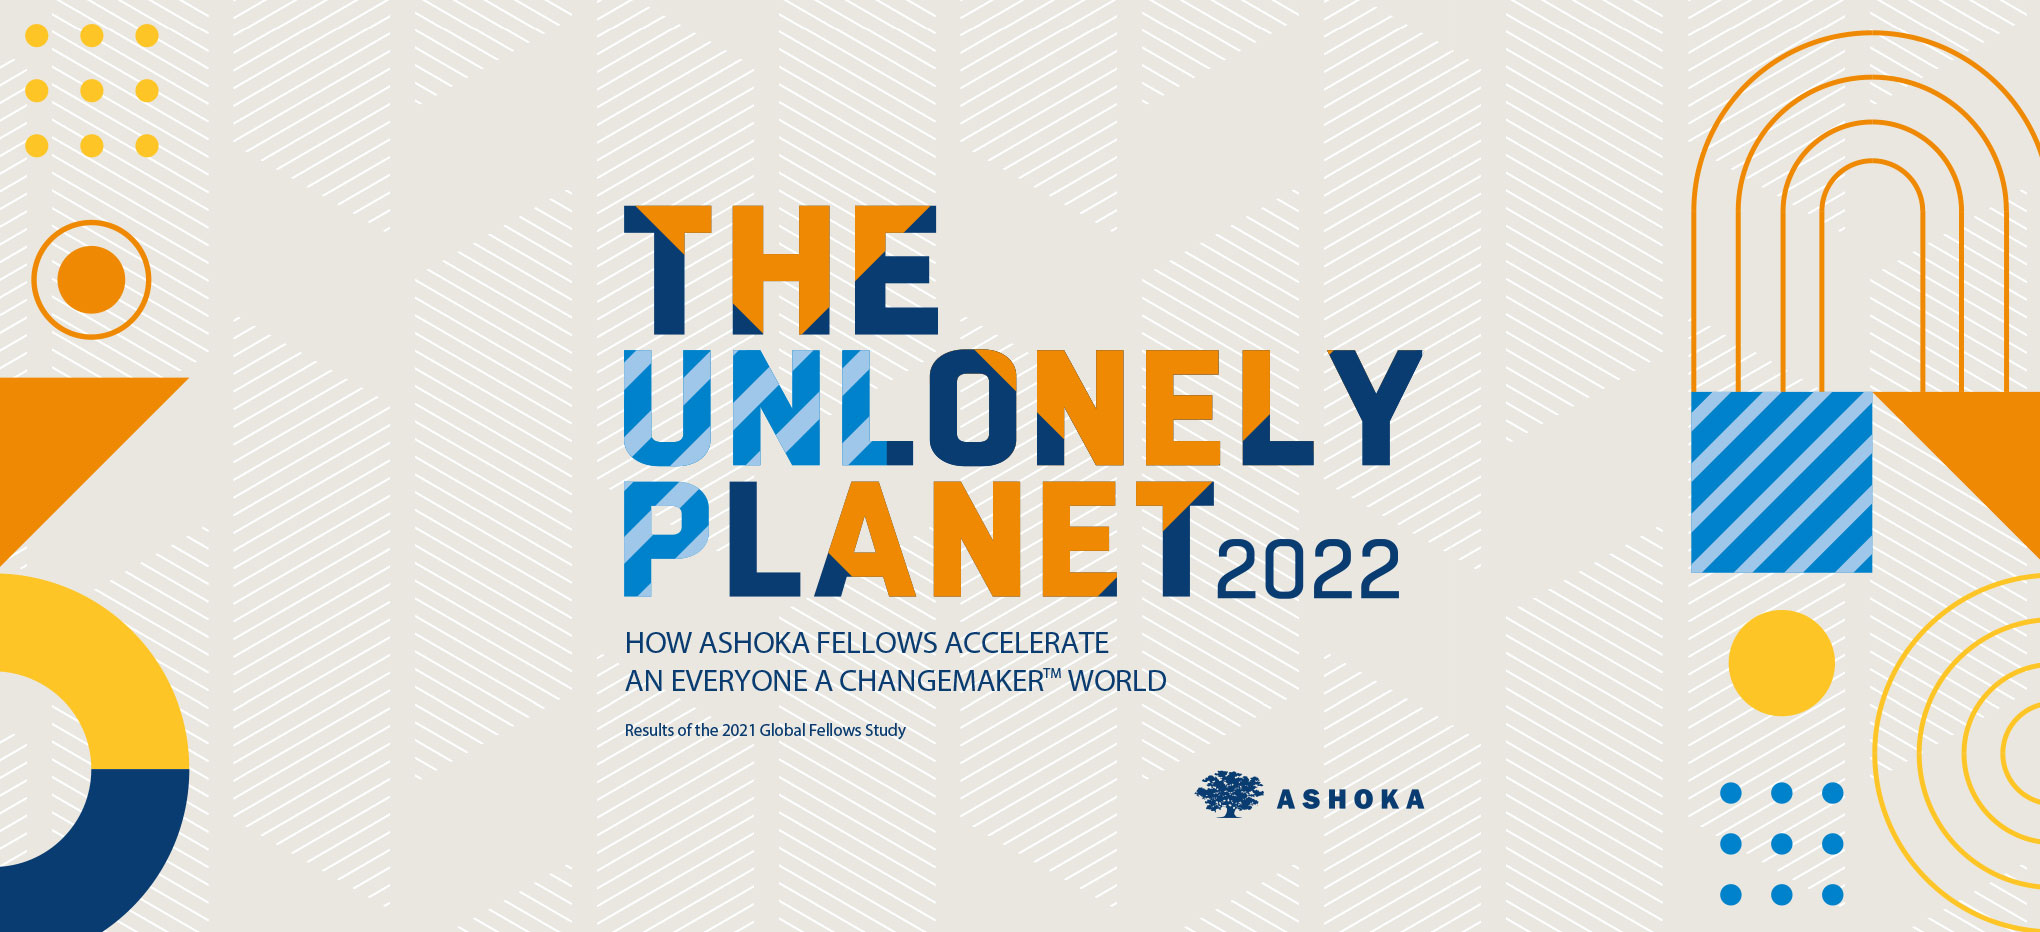 The header image with the text 'The Unlonely Planet 2022'